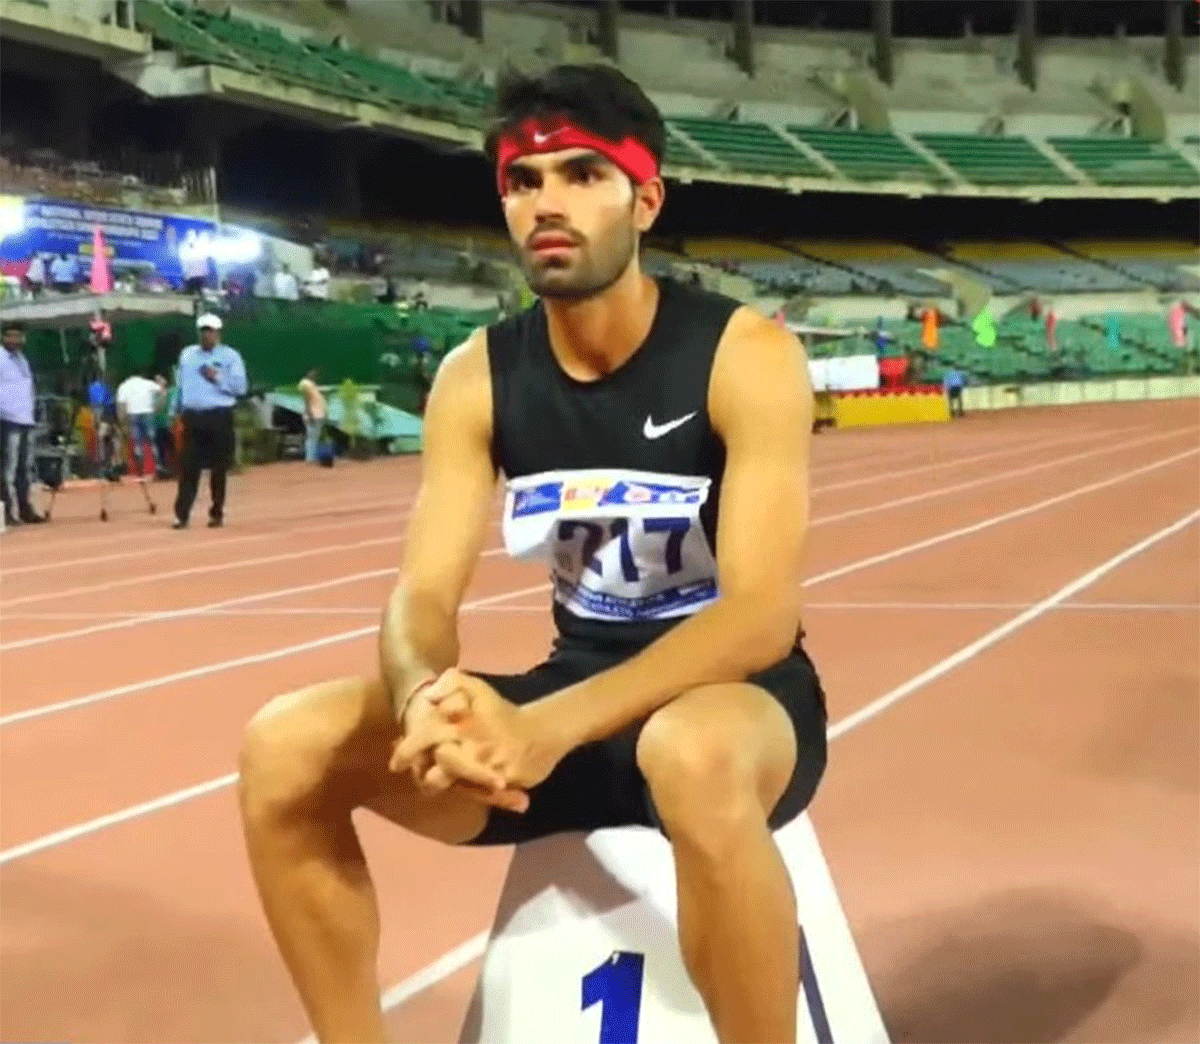 The 22-year-old Ayush Dabas has a personal best of 46.48s in 400m and 21.89s in 200m. He had taken part in the 400m race in the National Inter-State Championships in Chennai earlier this month and had failed to qualify for the final round.